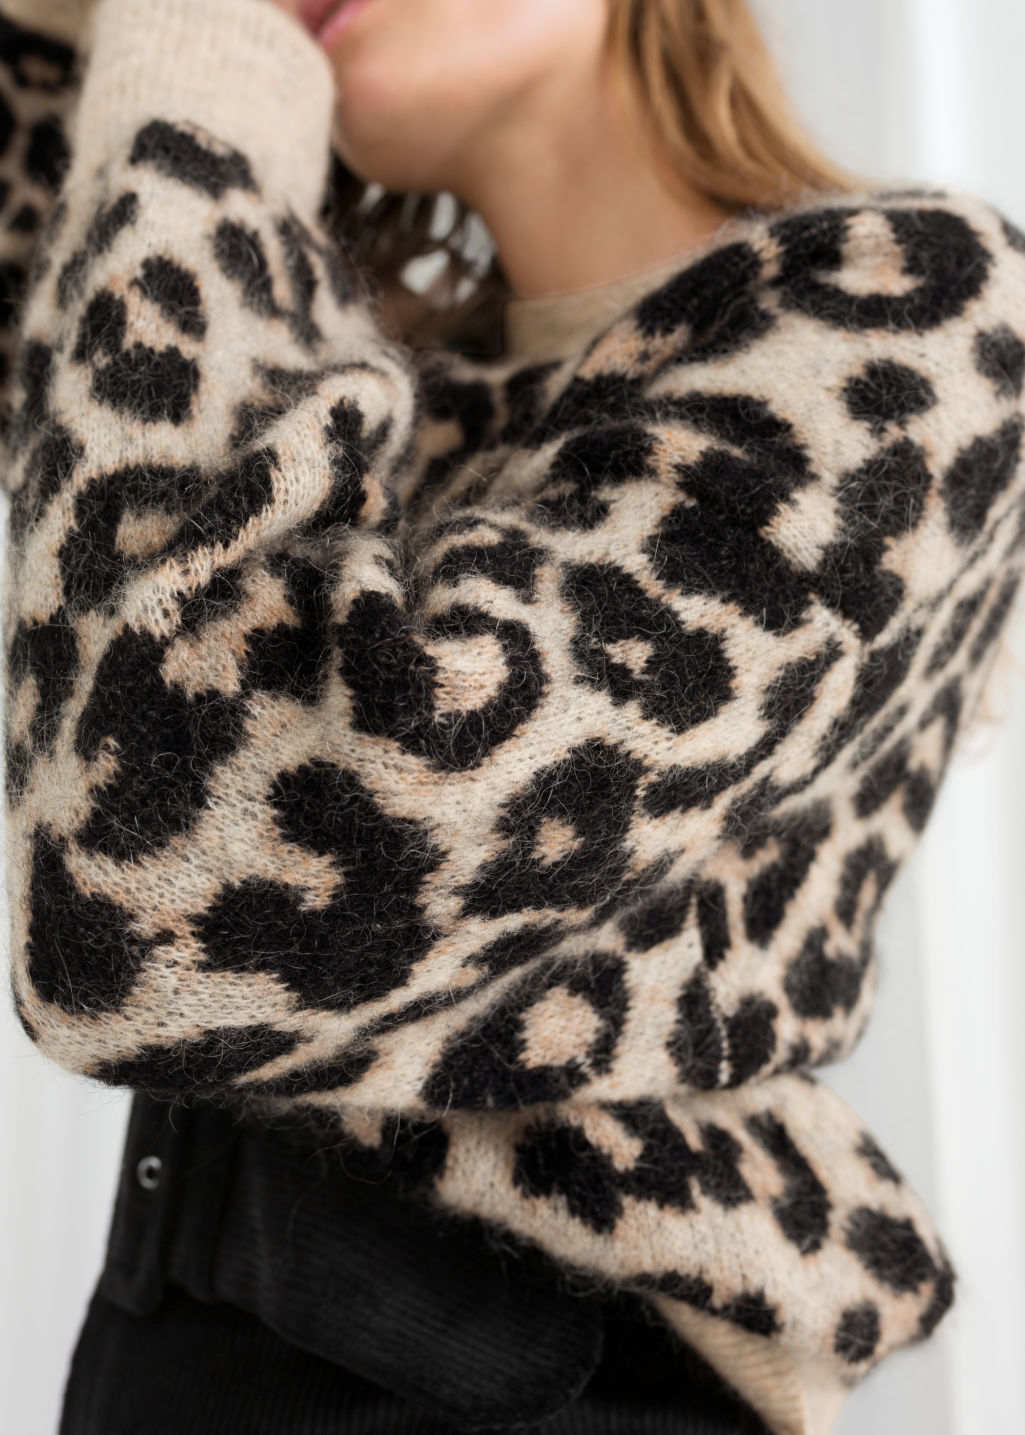 & Other Stories Oversized Leopard Print Sweater